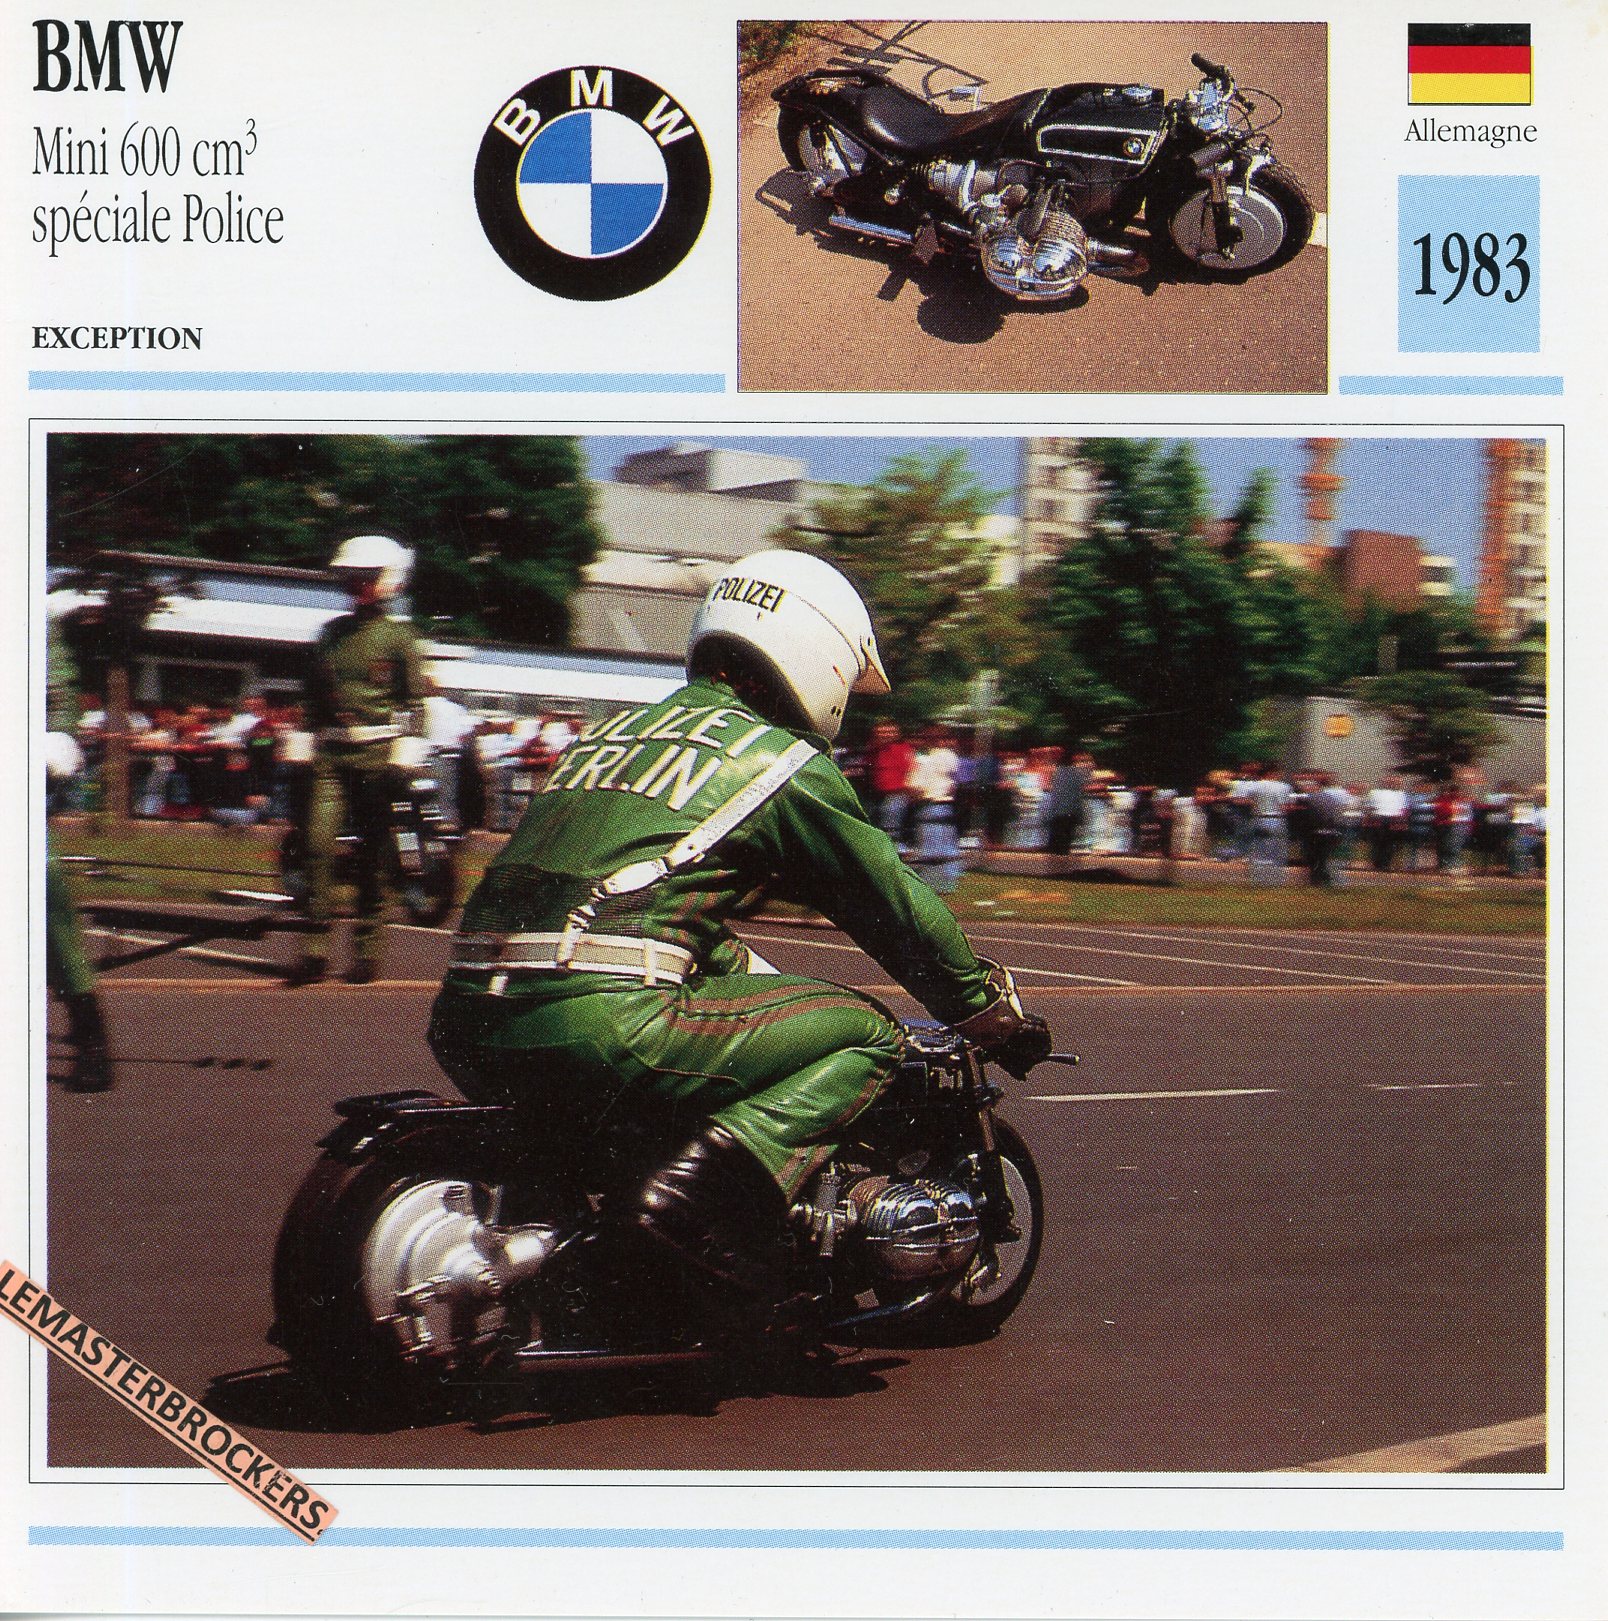 BMW-SPECIAL-POLICE-1983-FICHE-MINI-MOTO-MOTORCYCLE-CARDS-ATLAS-LEMASTERBROCKERS